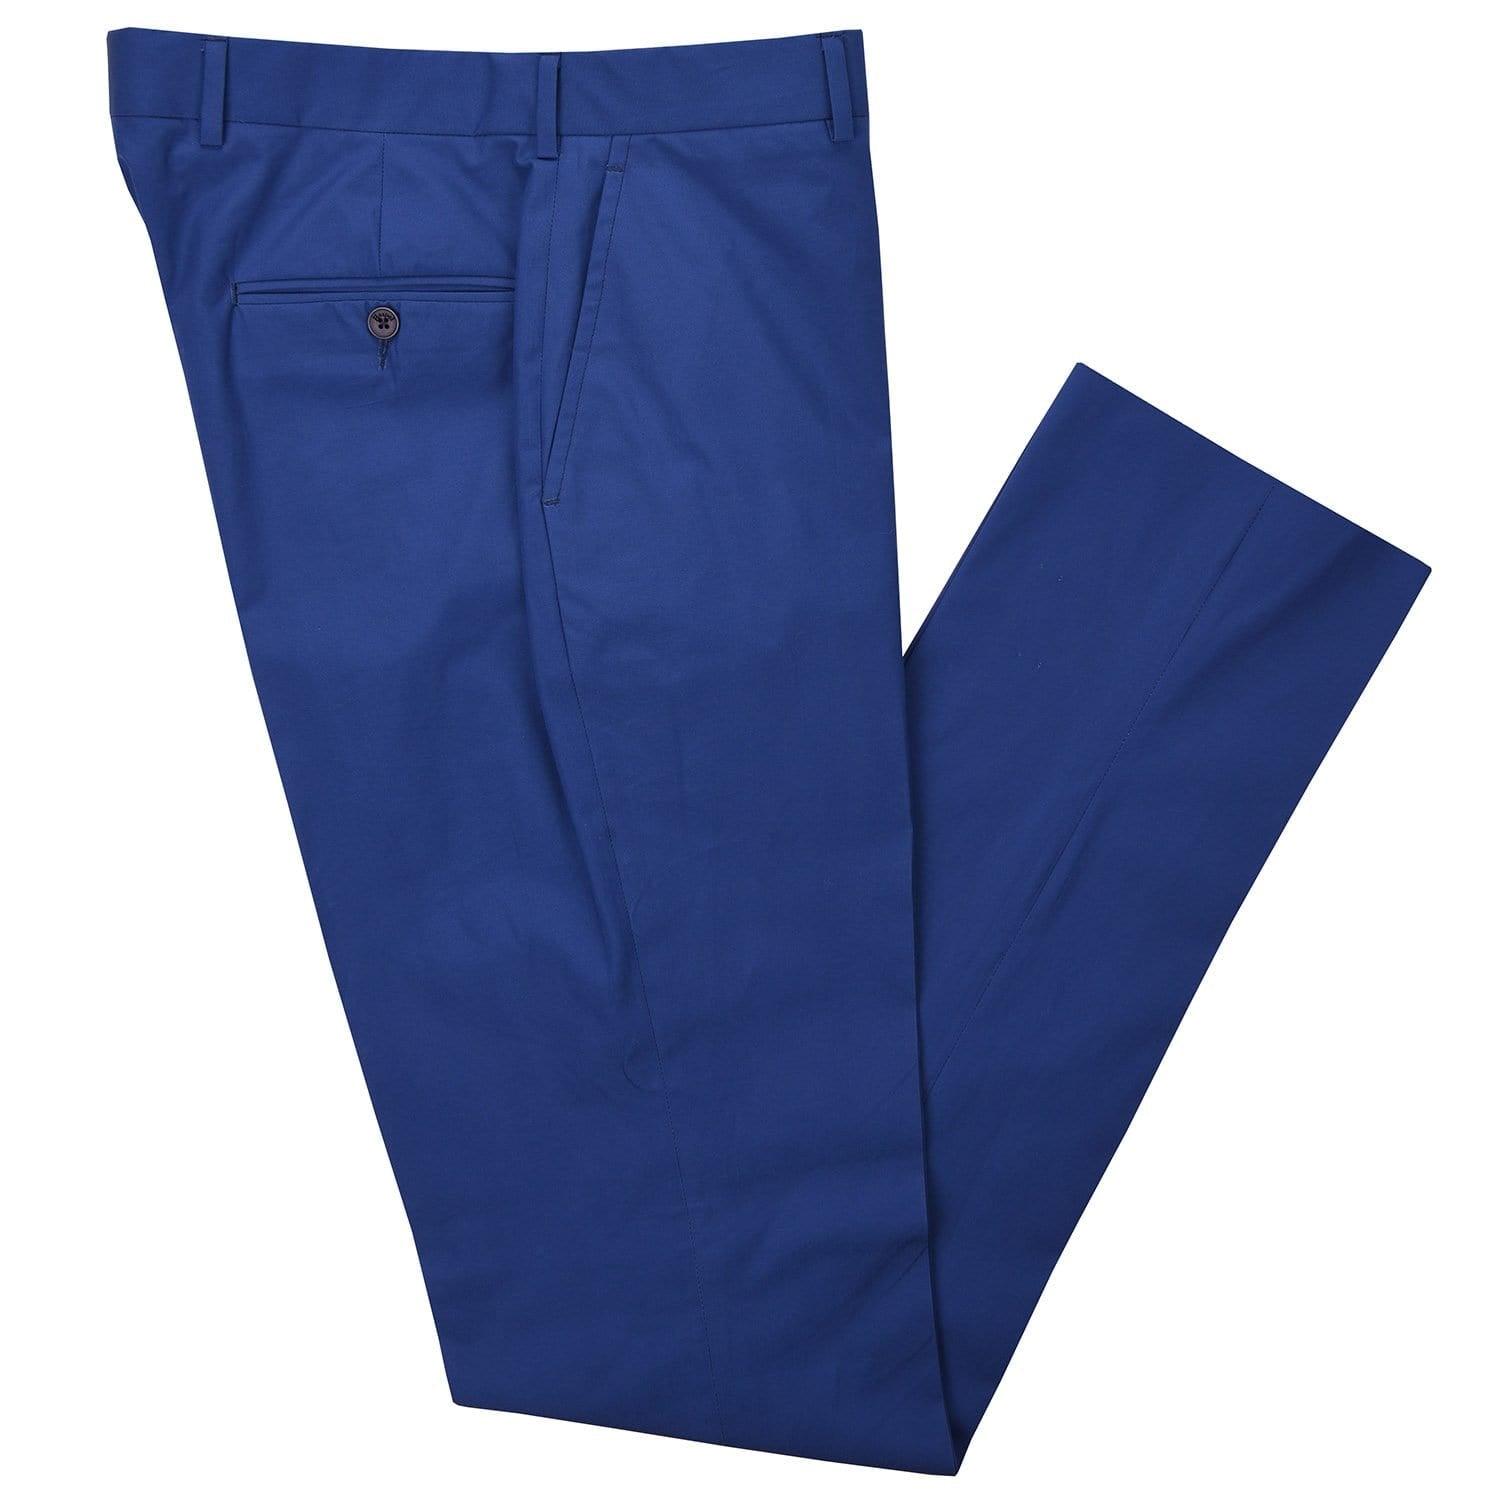 Leave the traditional khakis at the office and let our year round 100% cotton poplin pants keep Spring in your step all year long.